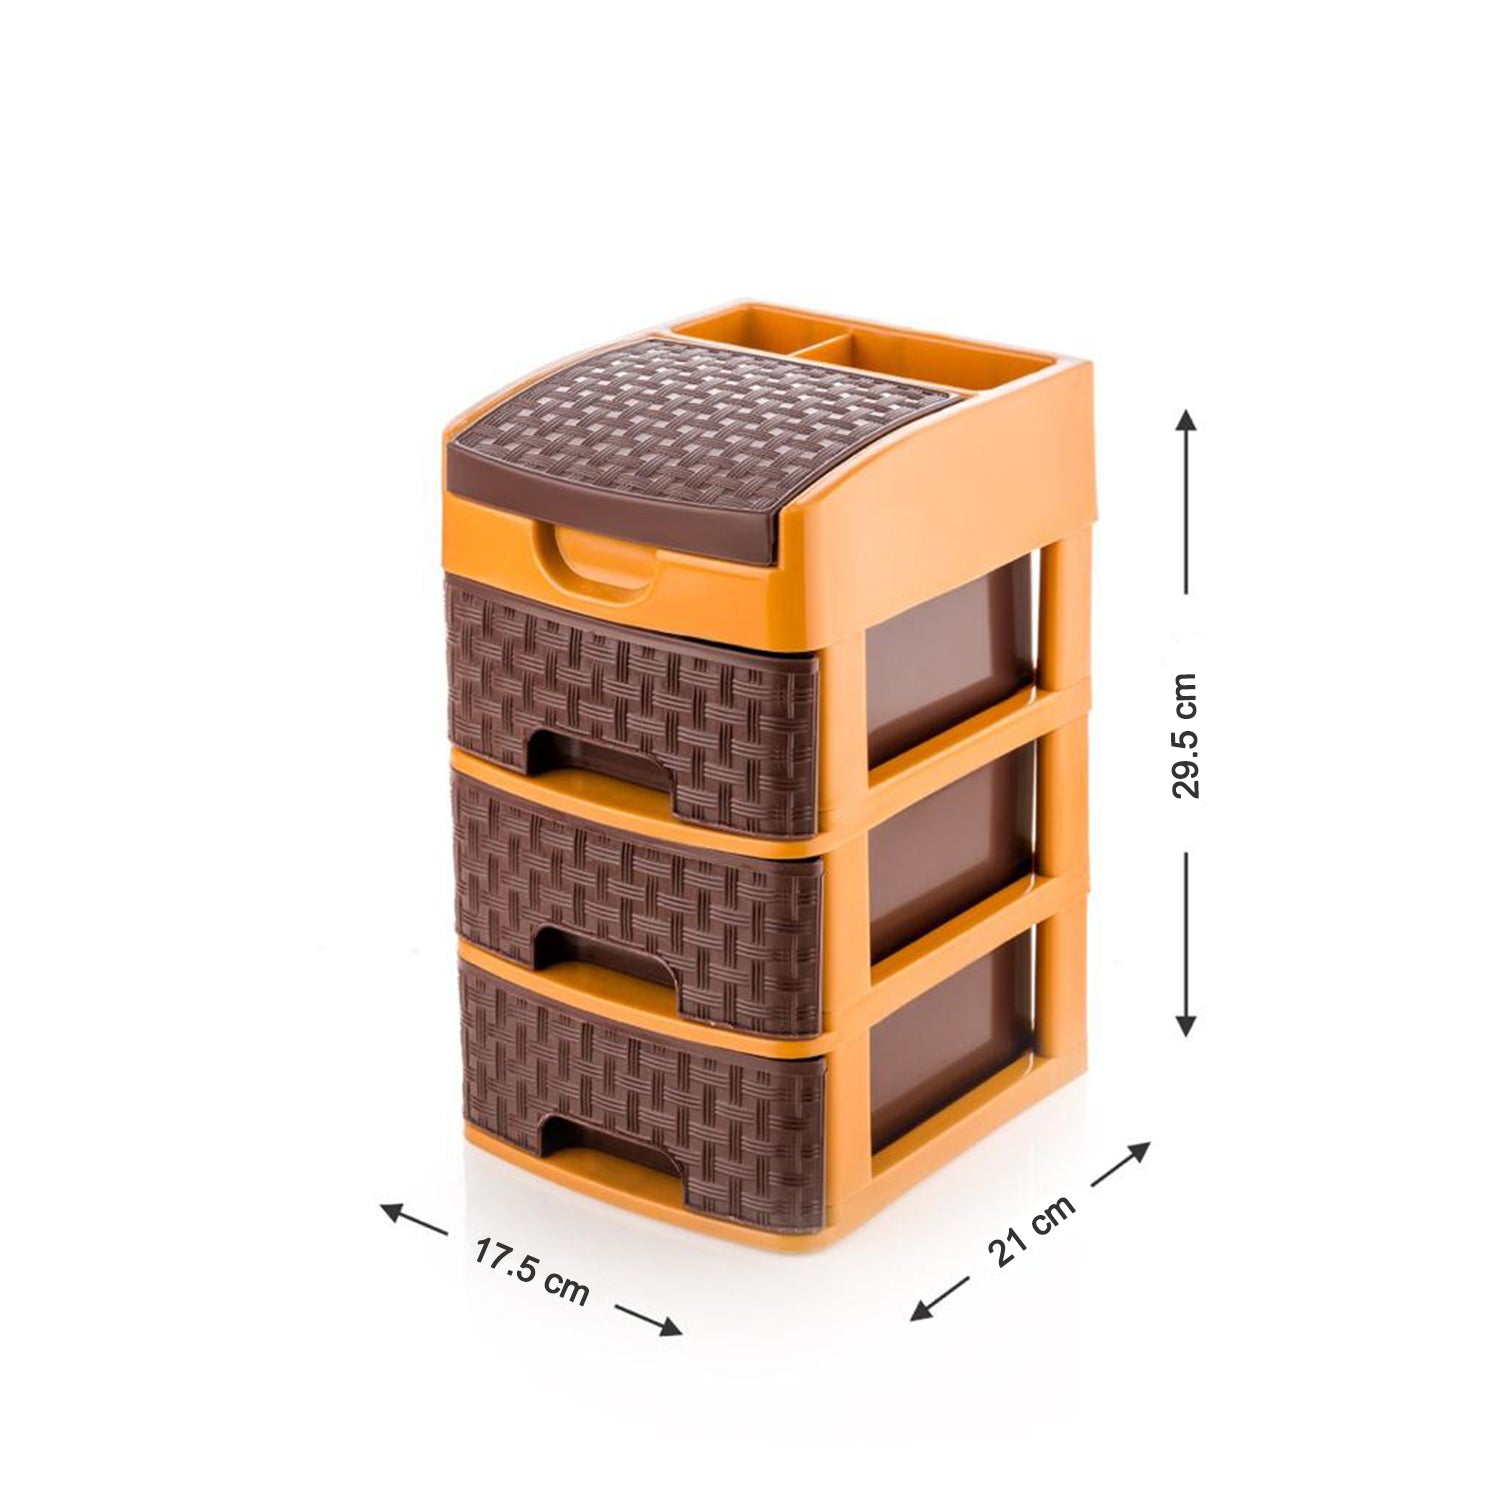 4792 Mini 3 Layer D Storage used in all kinds of household and official places for storing of various types of stuffs and items etc. DeoDap